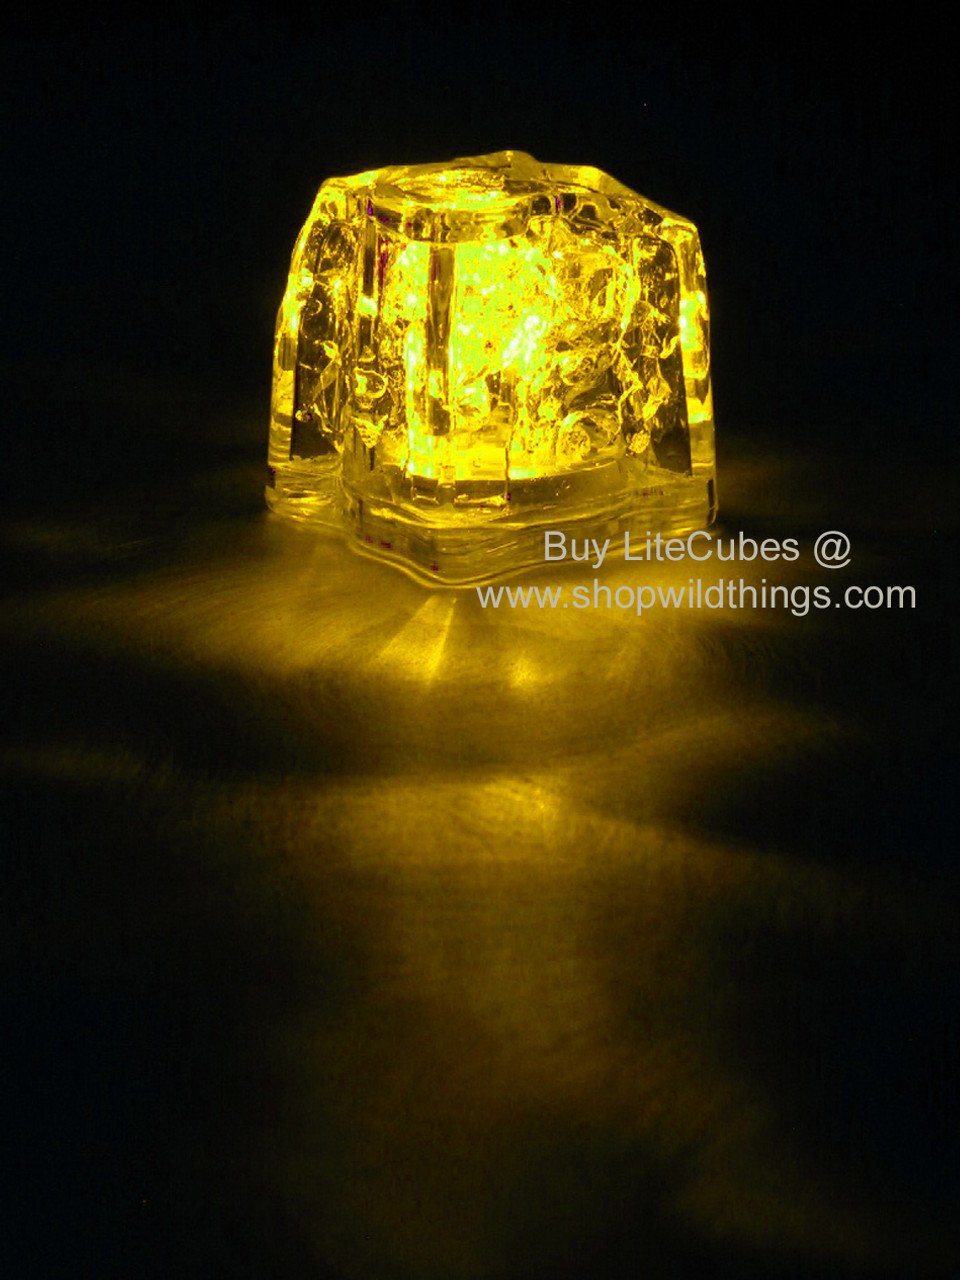 https://cdn11.bigcommerce.com/s-x1vm6a4952/images/stencil/1280x1280/products/7911/23414/led-ice-cube-litecubes-yellow-light-flashing-or-steady-waterproof-freezable-64__81661.1646342994.jpg?c=2